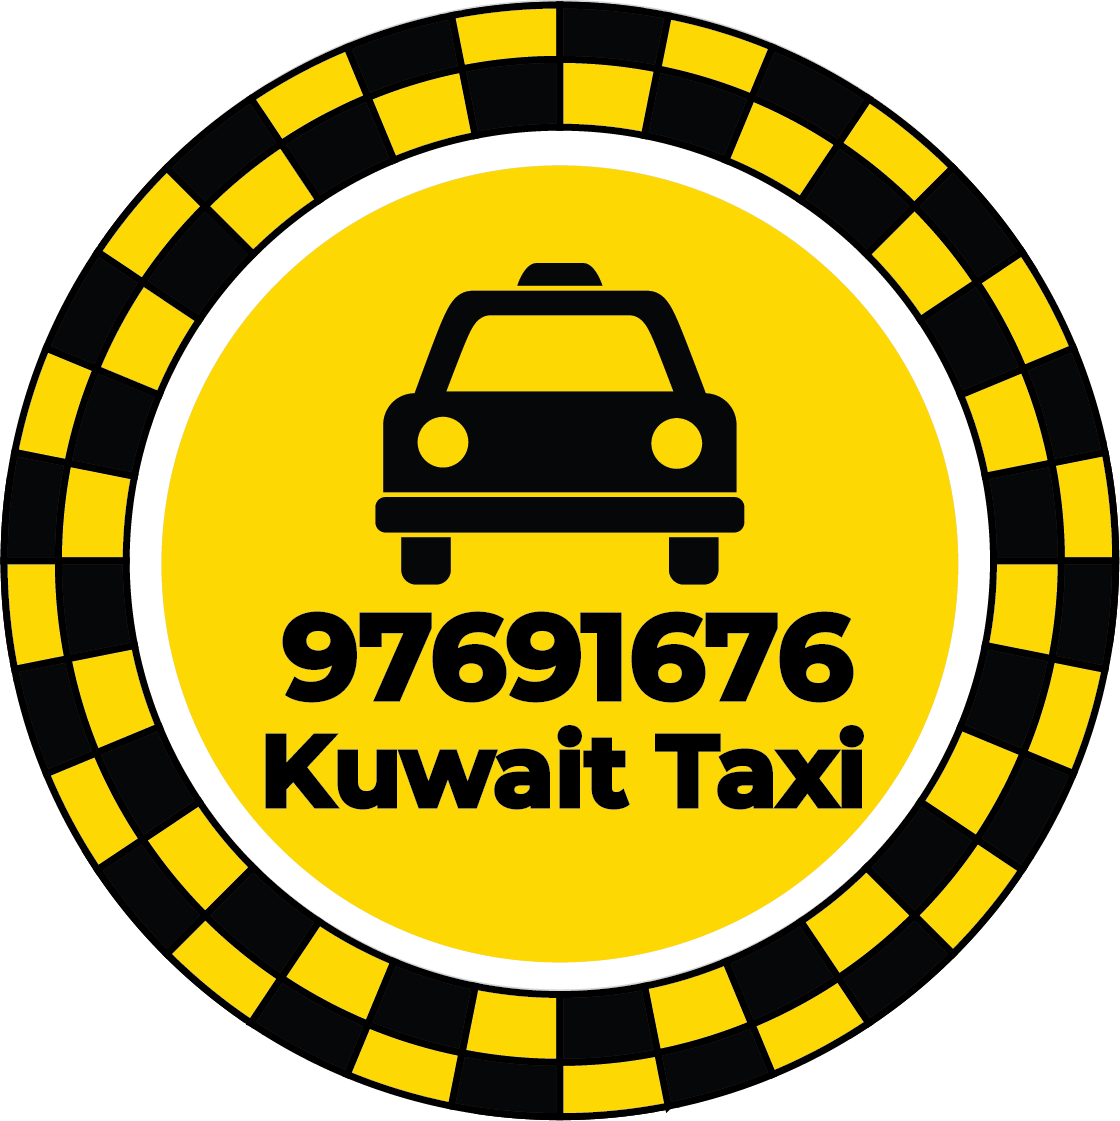 Taxi Fares in Kuwait - Taxi Cab fare in Kuwait